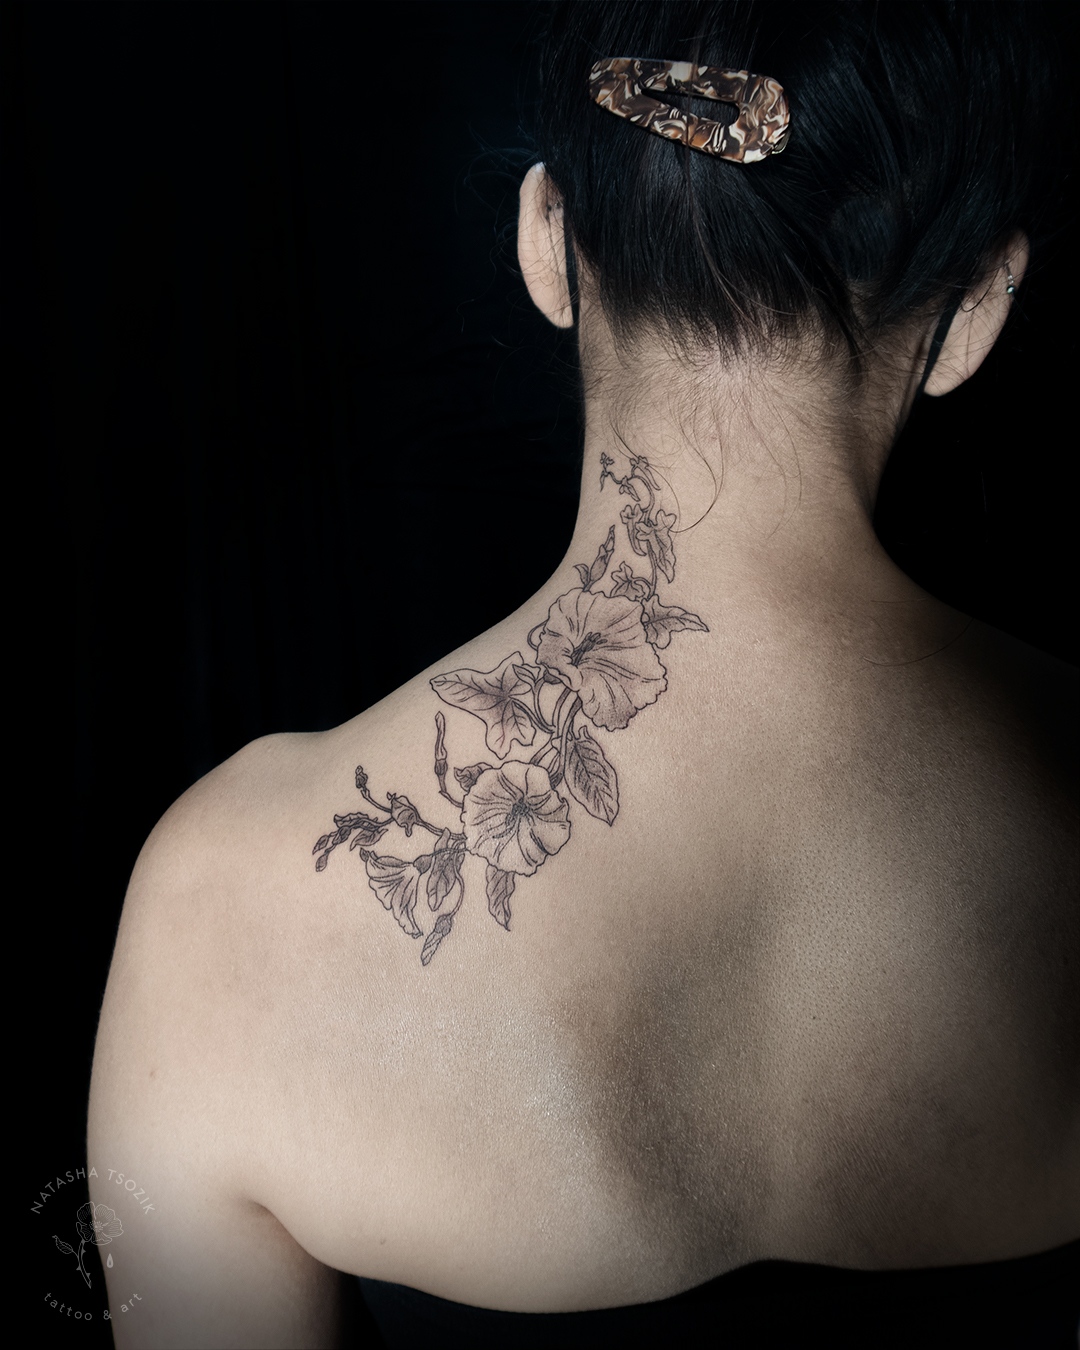 Plant tattoo on a shoulder.